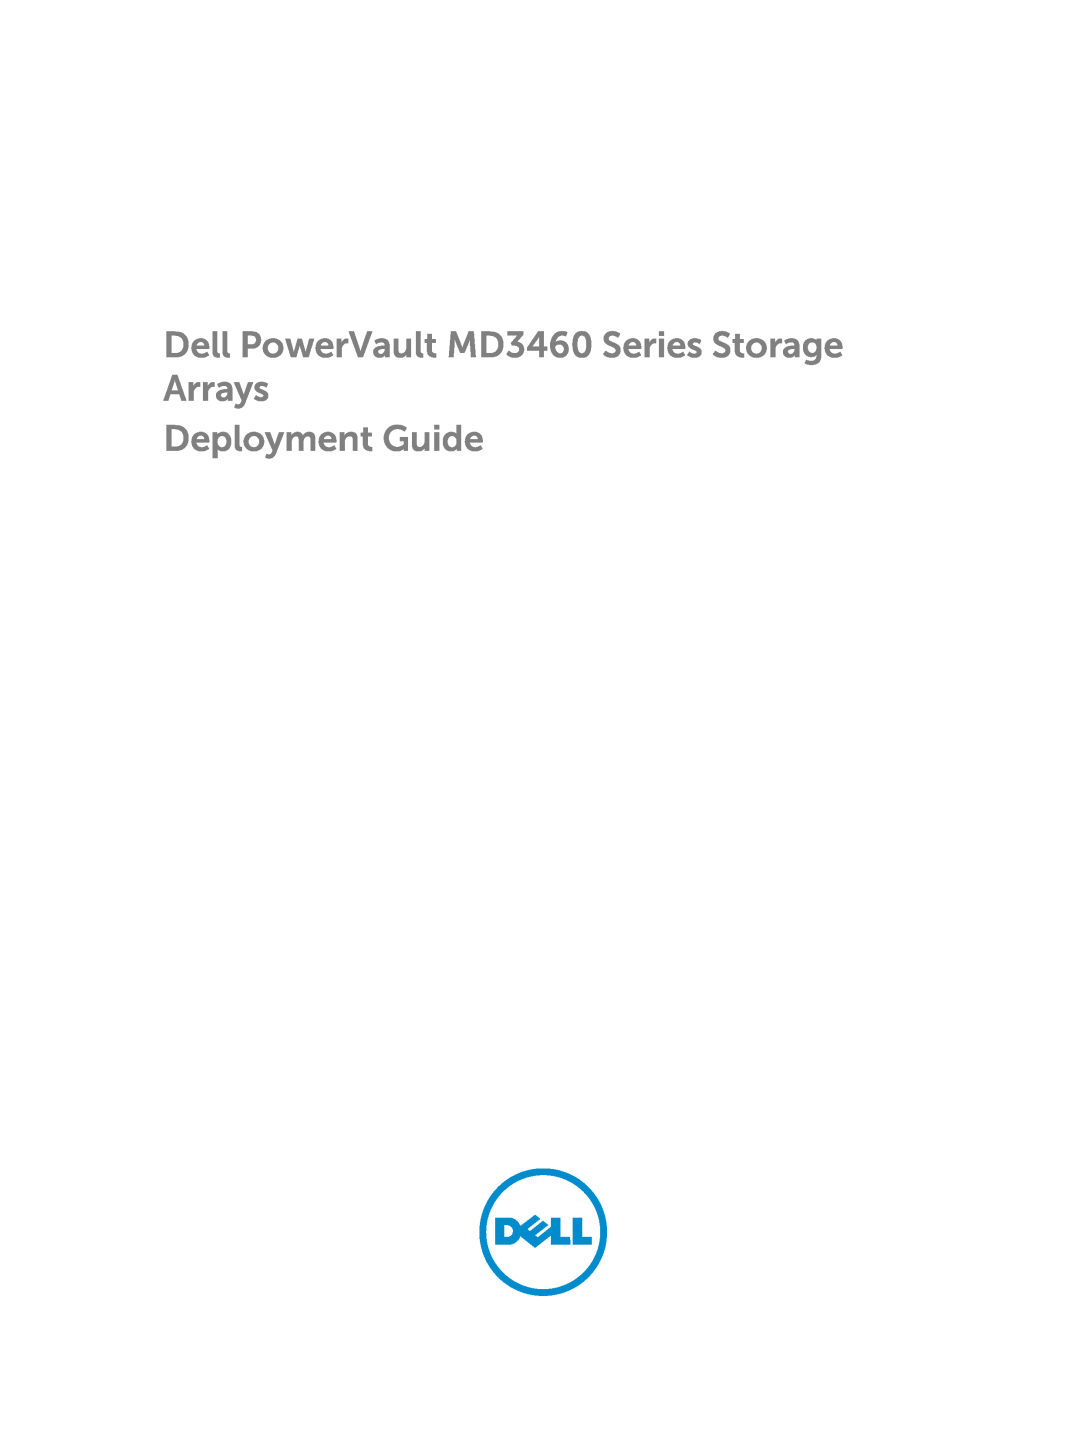 Dell manual Dell PowerVault MD3460 Series Storage Arrays, Deployment Guide 